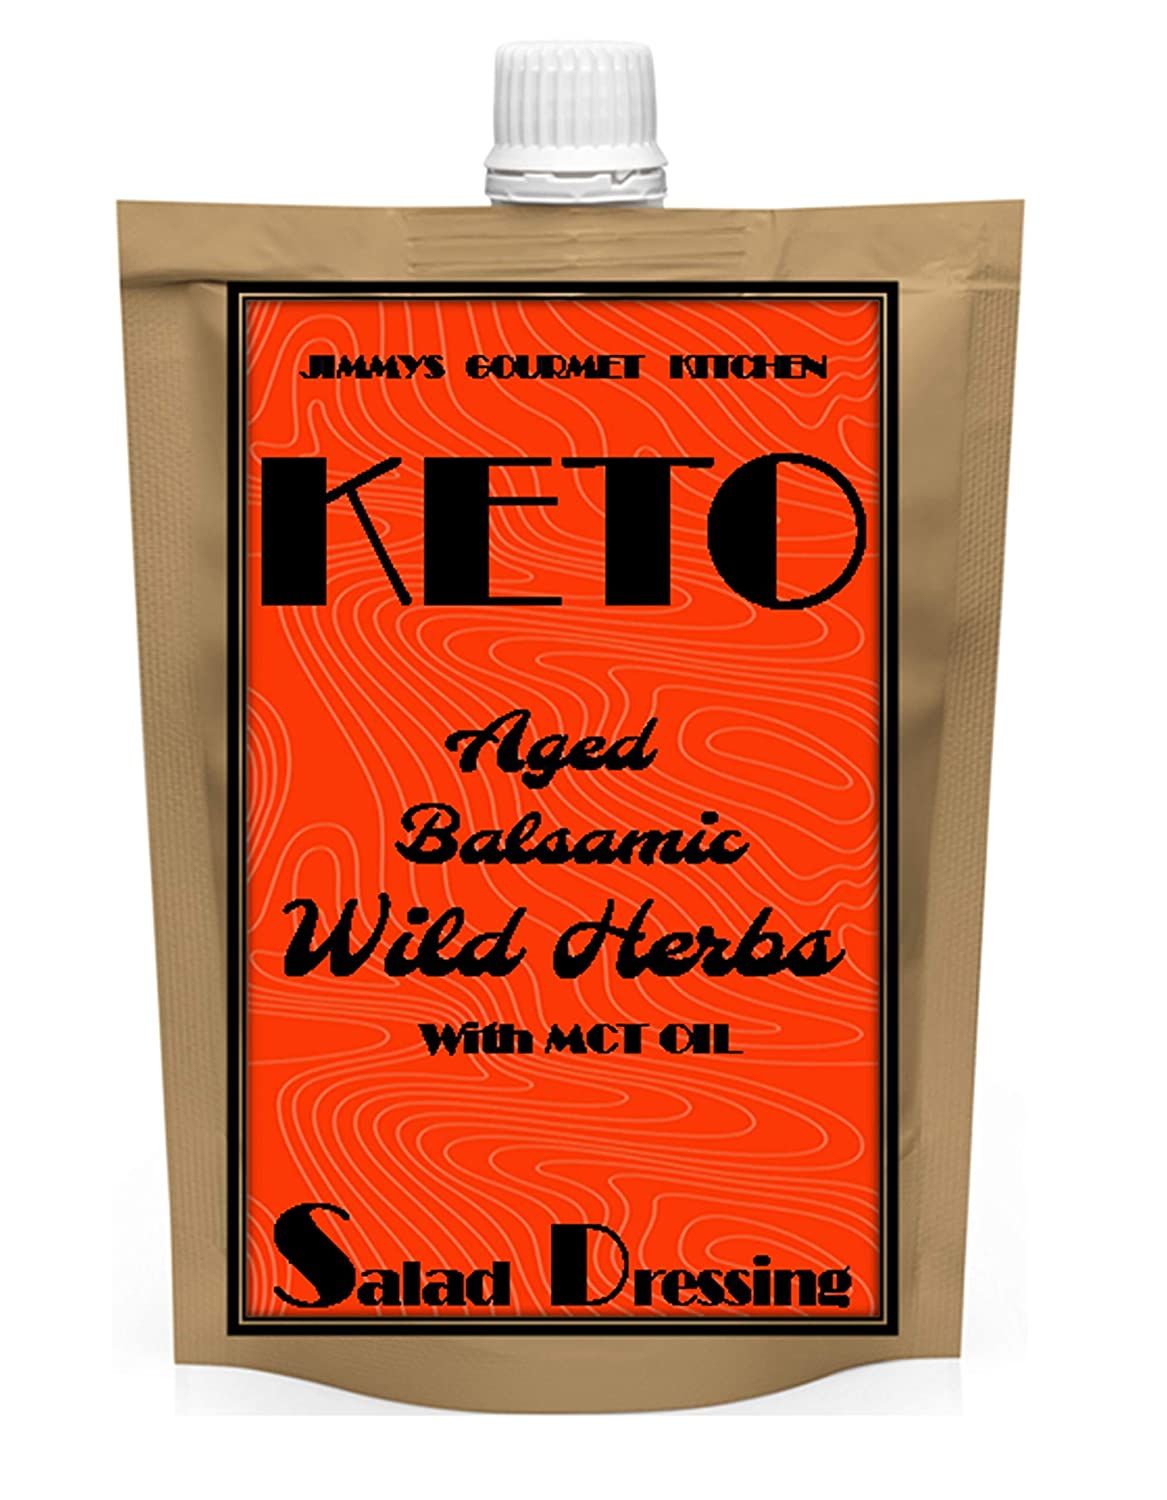 Jimmy's Gourmet Kitchen Keto Salad Dressing Wild Herbs with Aged Balsamic Image